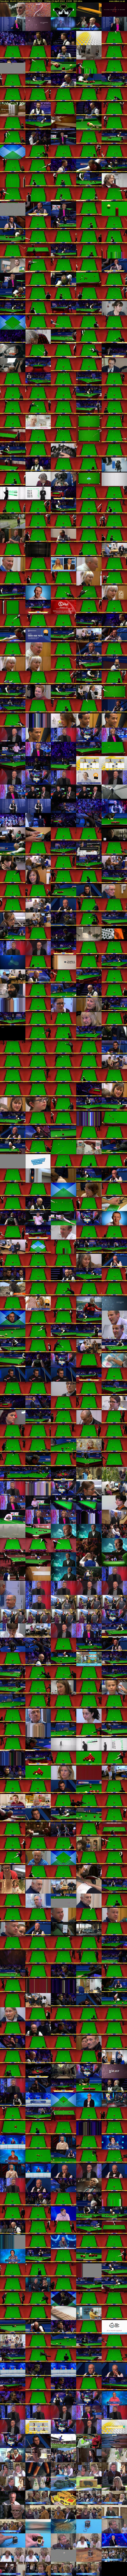 Snooker: World Championship (BBC TWO) Friday 29 April 2022 13:00 - 18:00